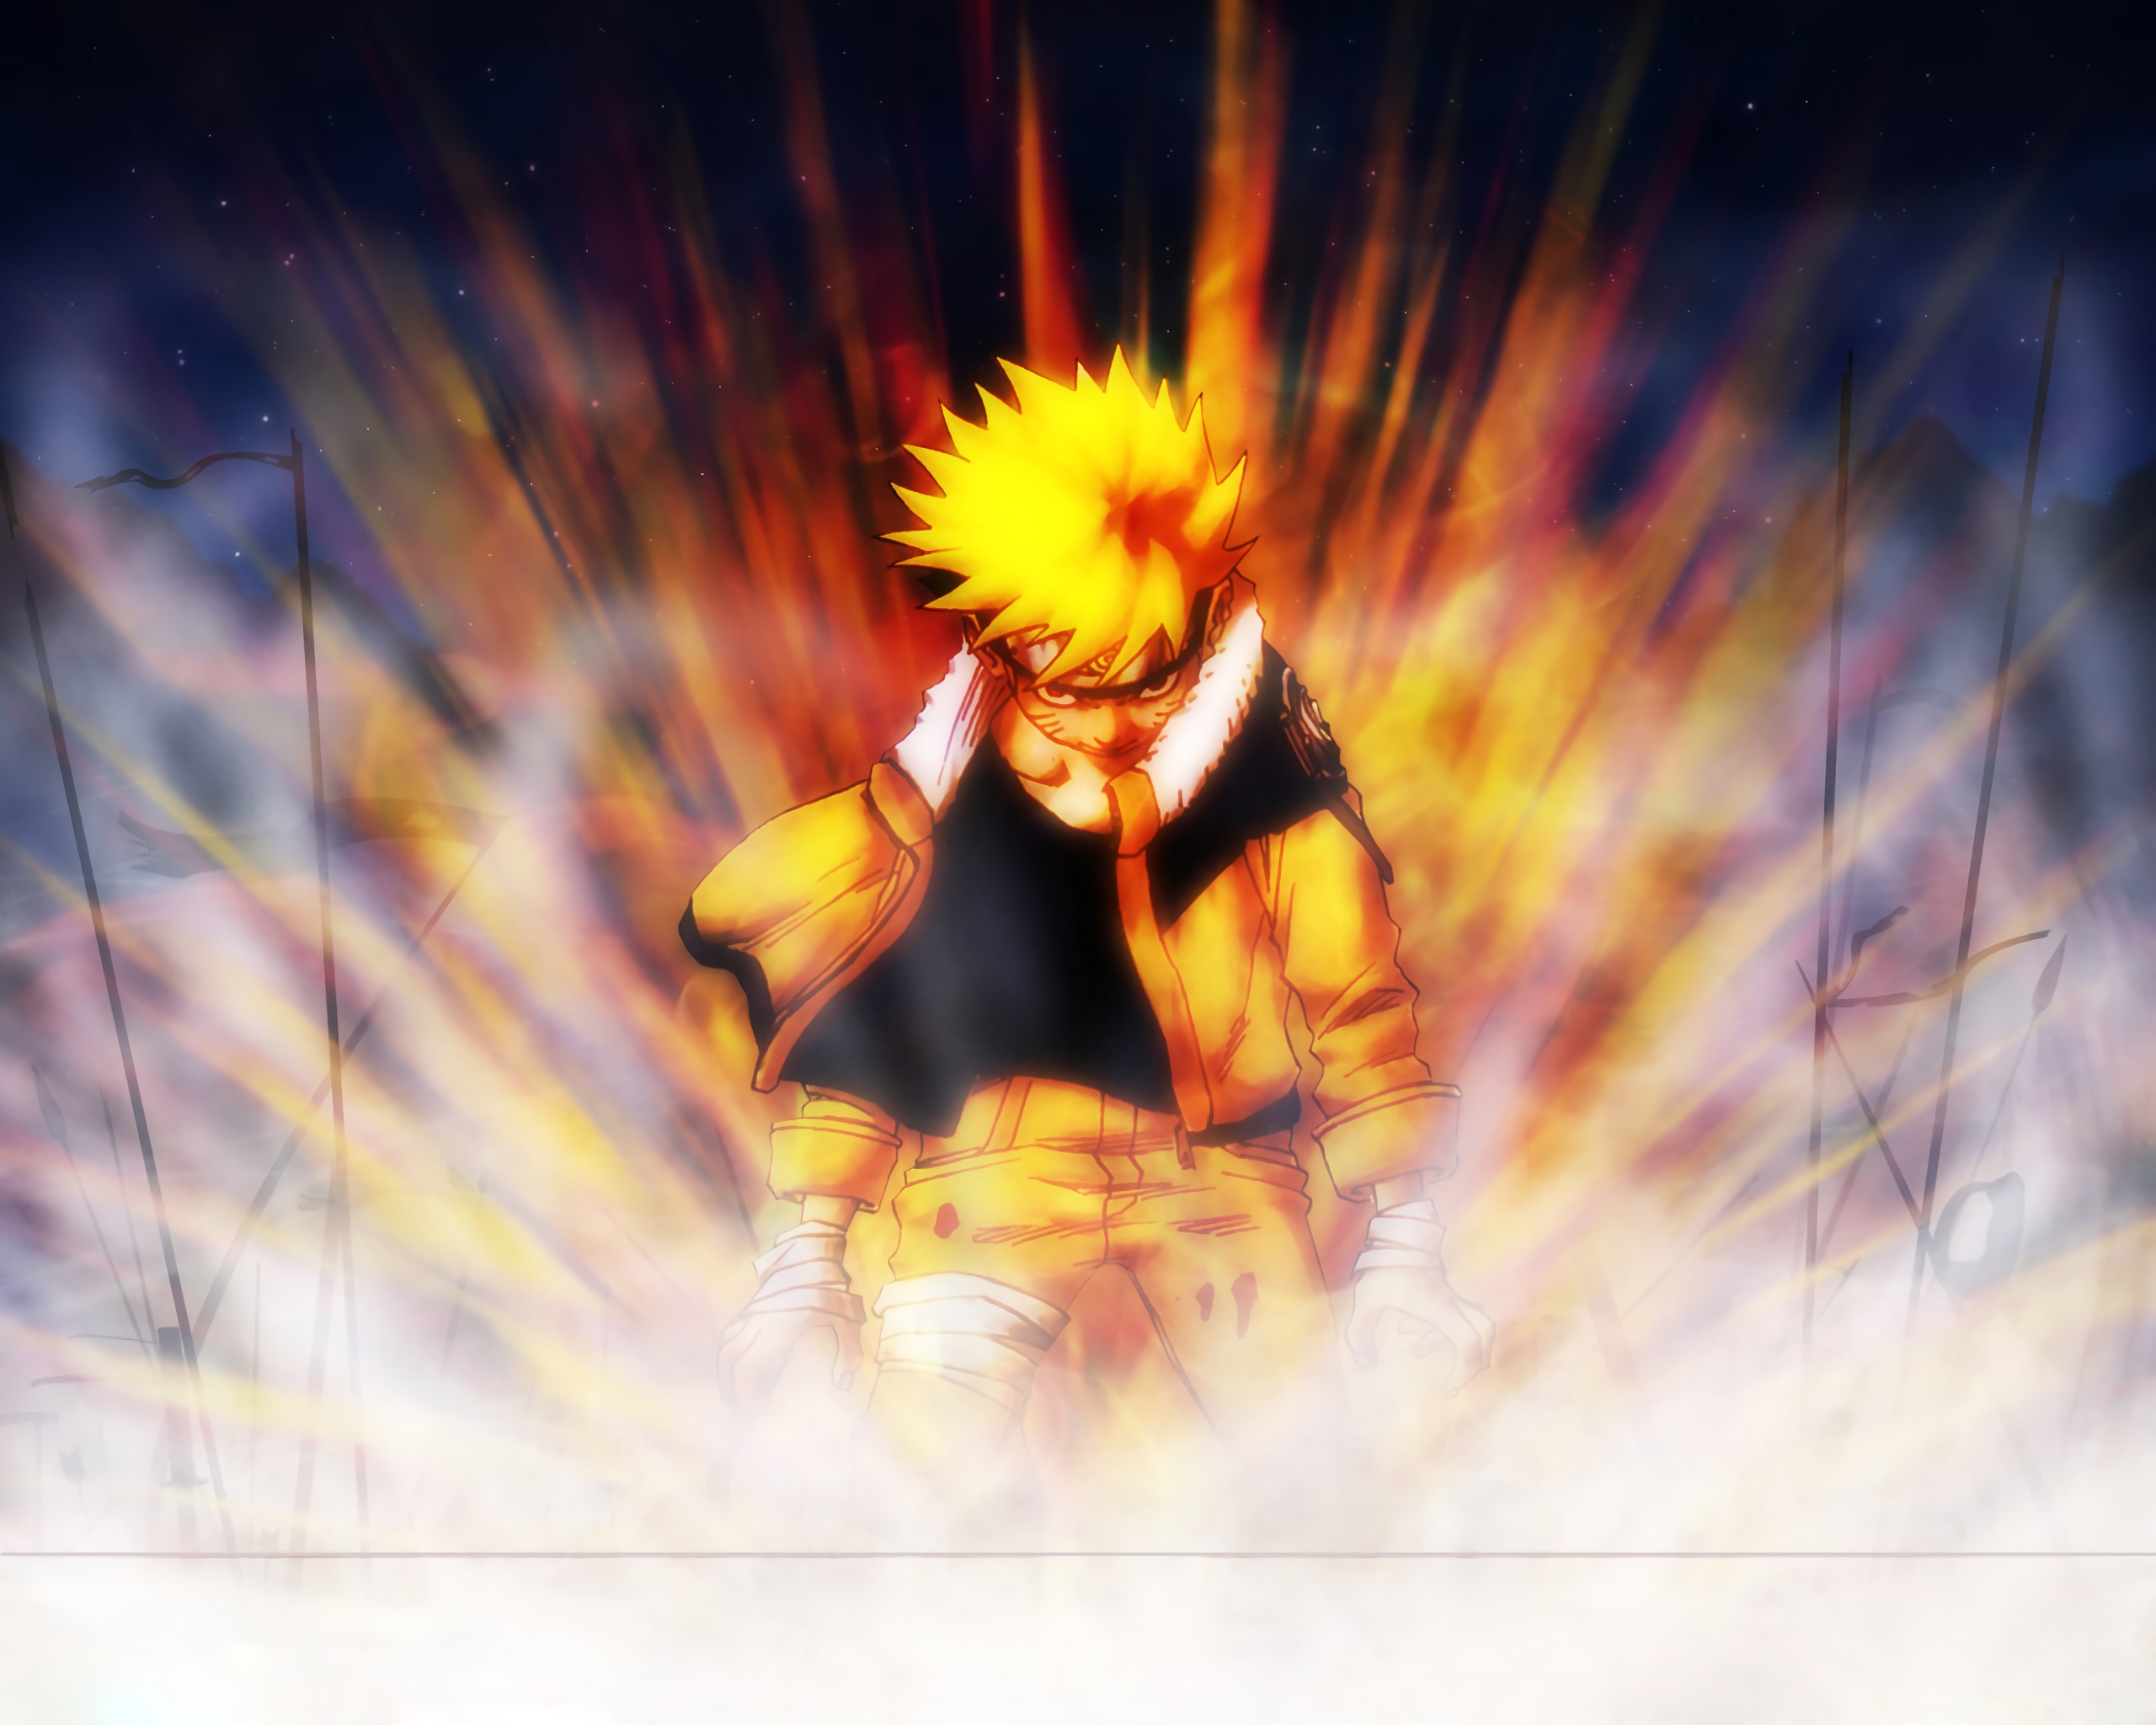 10 Latest Cool Naruto Shippuden Wallpapers FULL HD 1920×1080 For PC